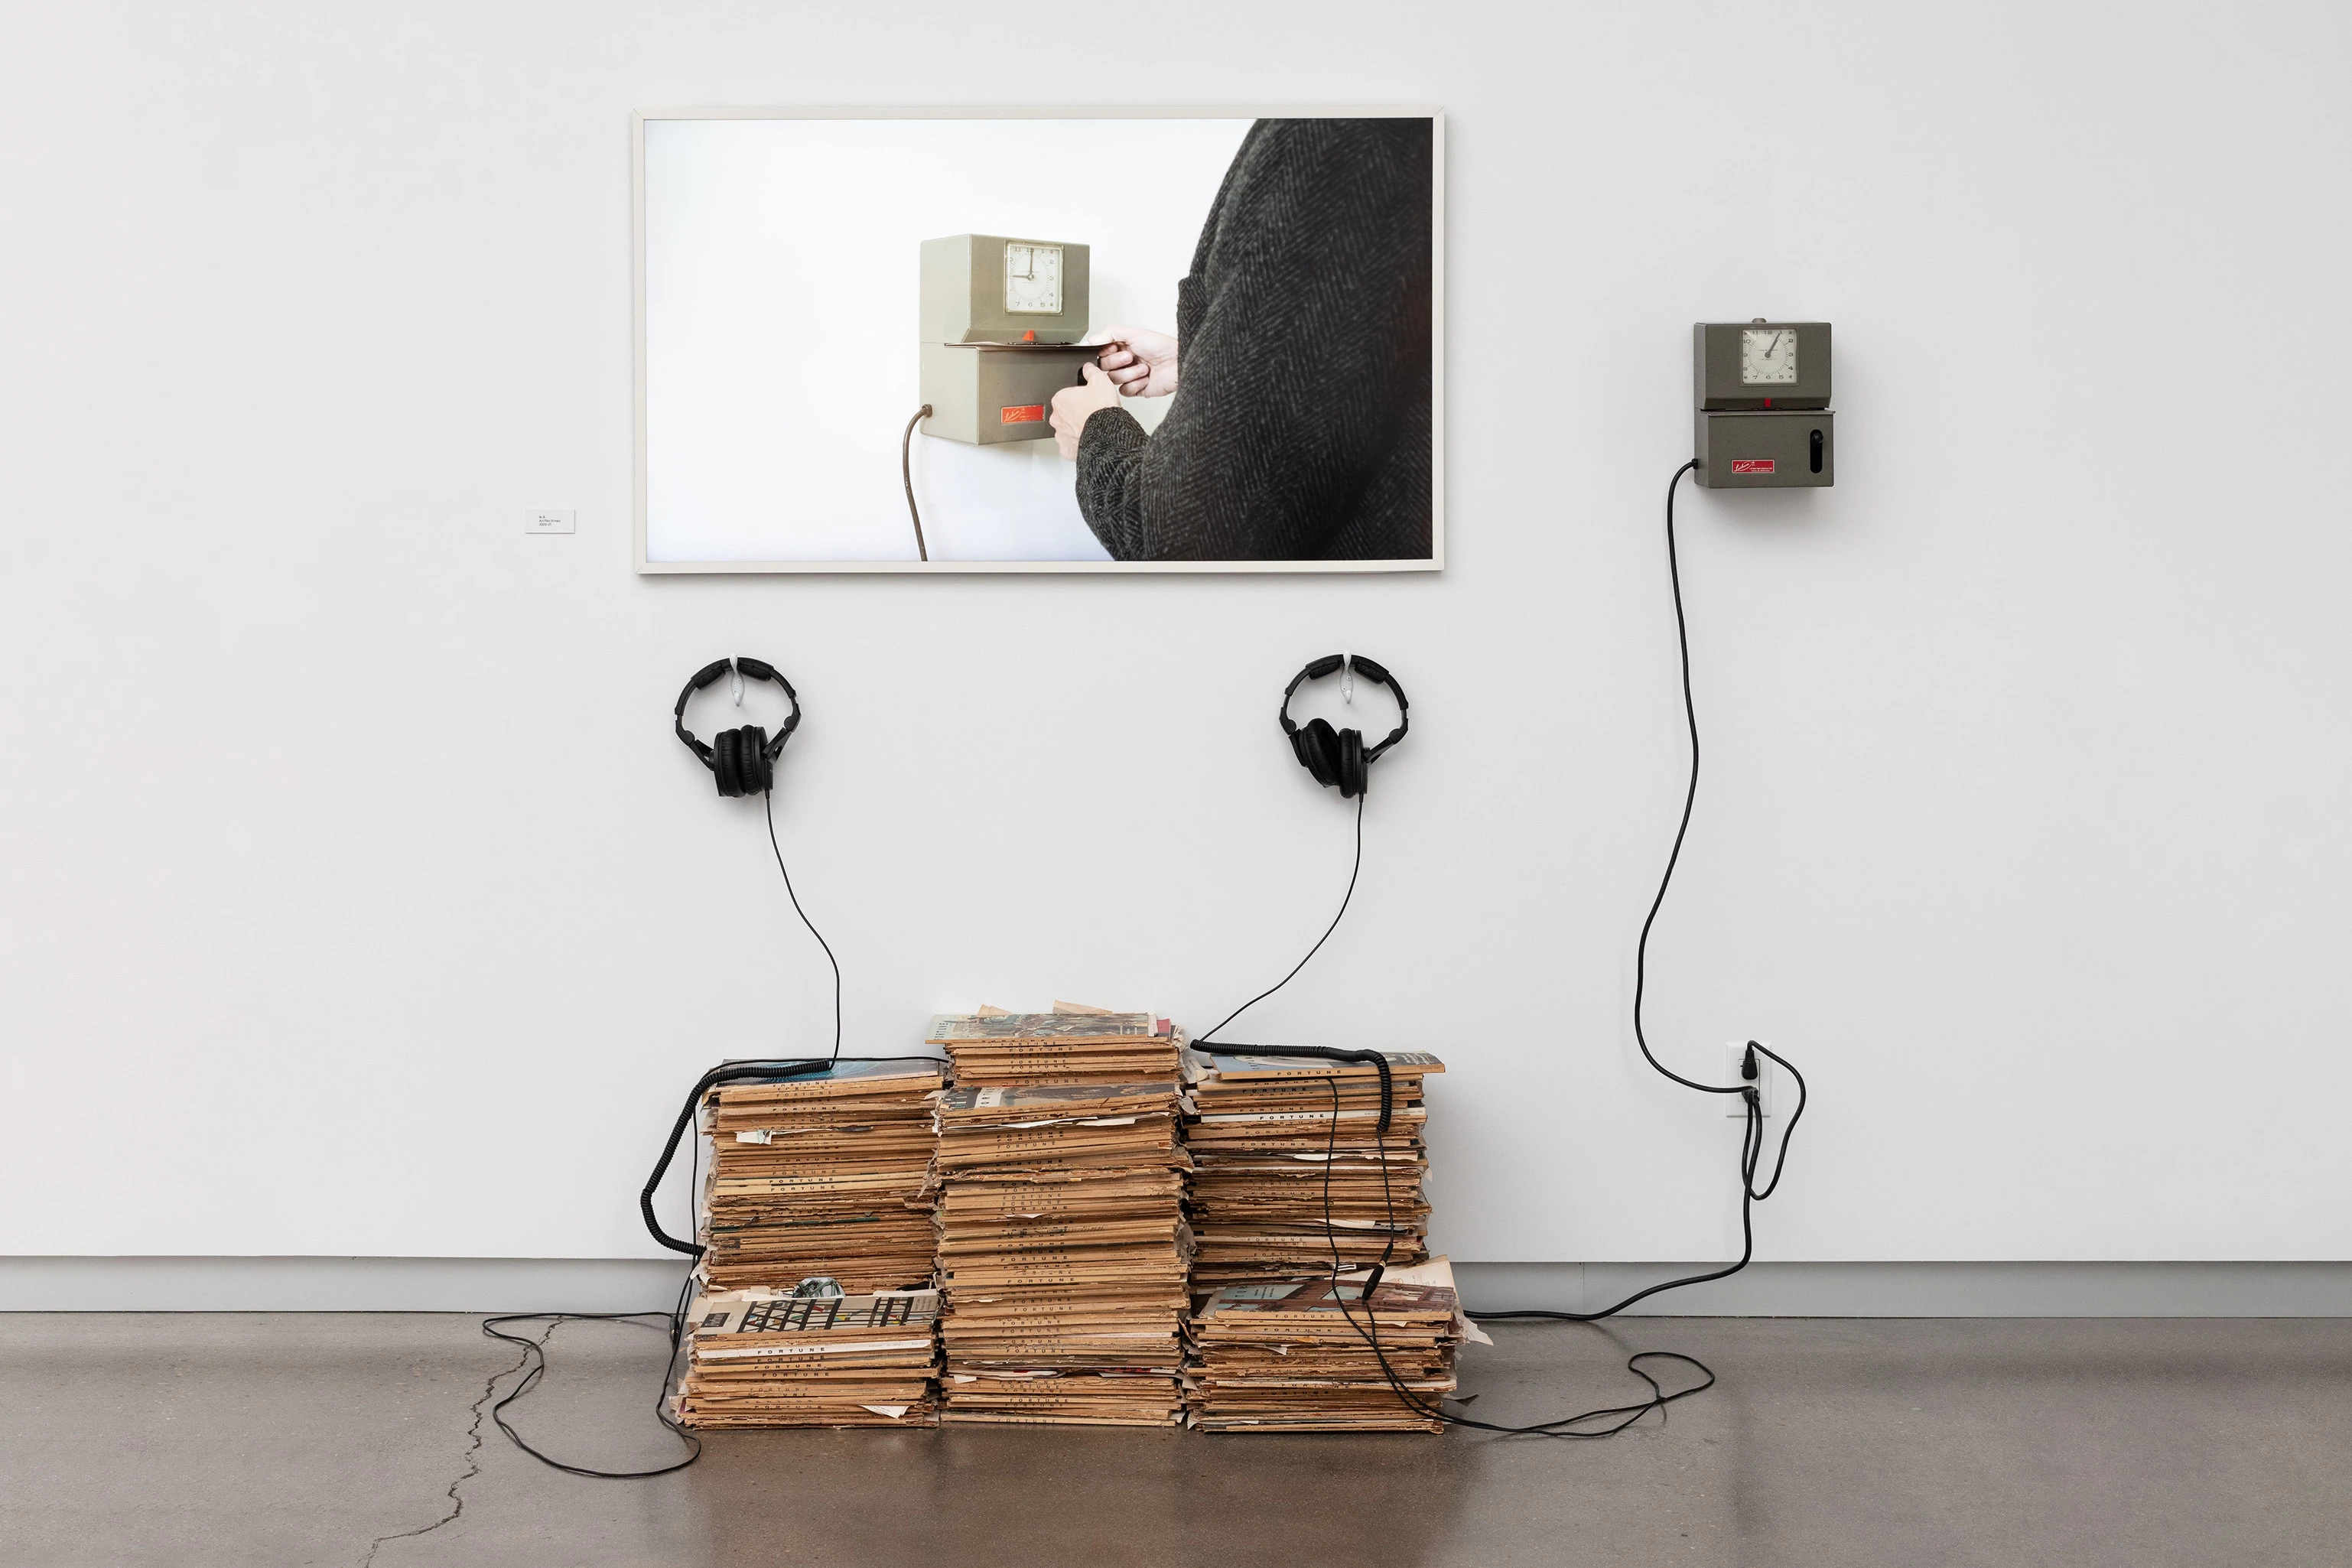 Installation view of screen, stacks of magazine, headphones, and punch-in clock against a gallery wall